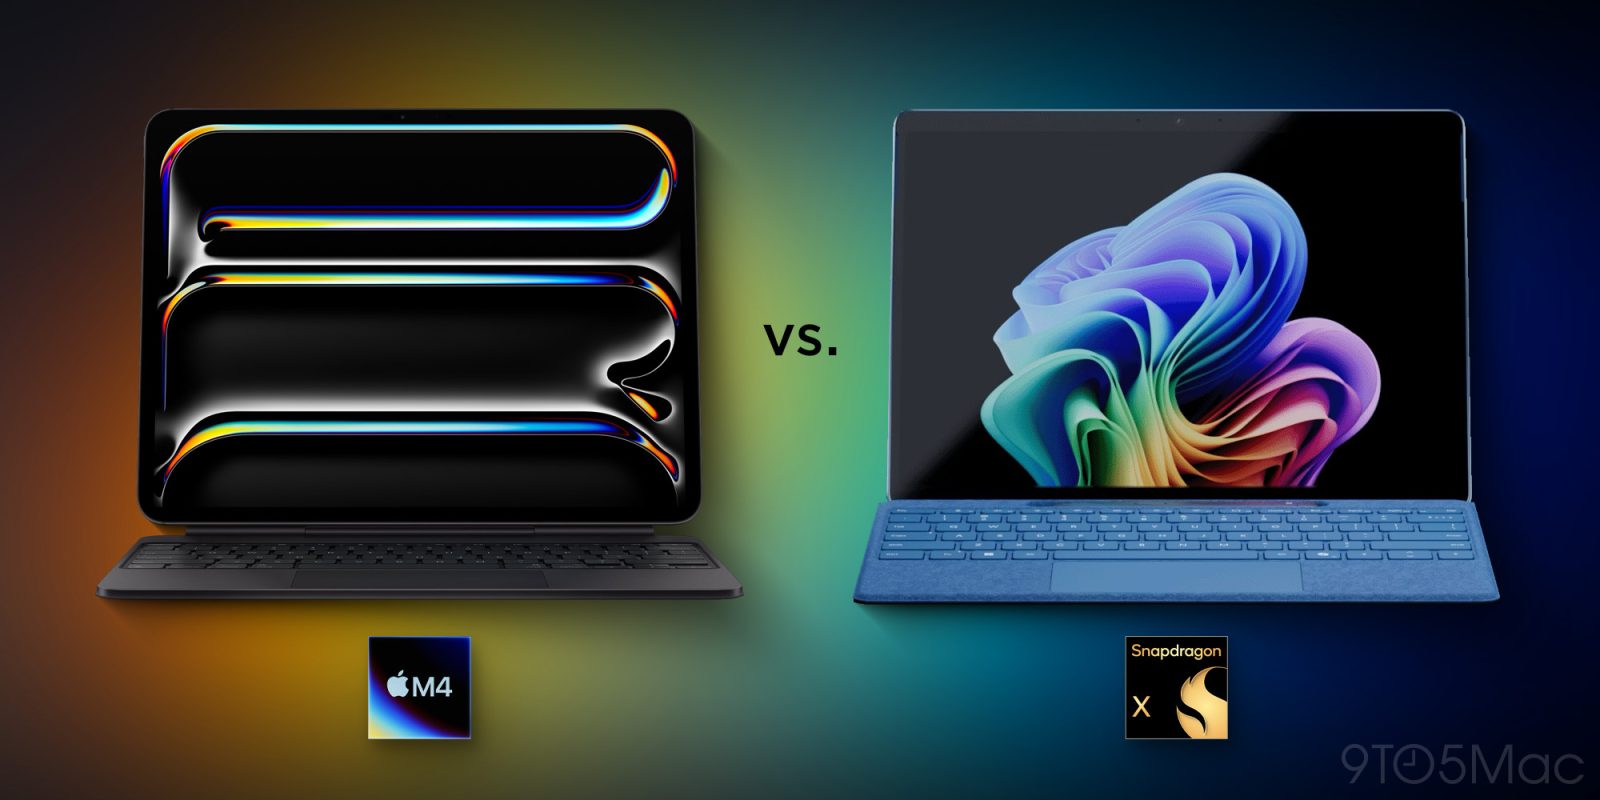 M4 iPad Pro vs Microsoft Surface Pro: How do they stack up?